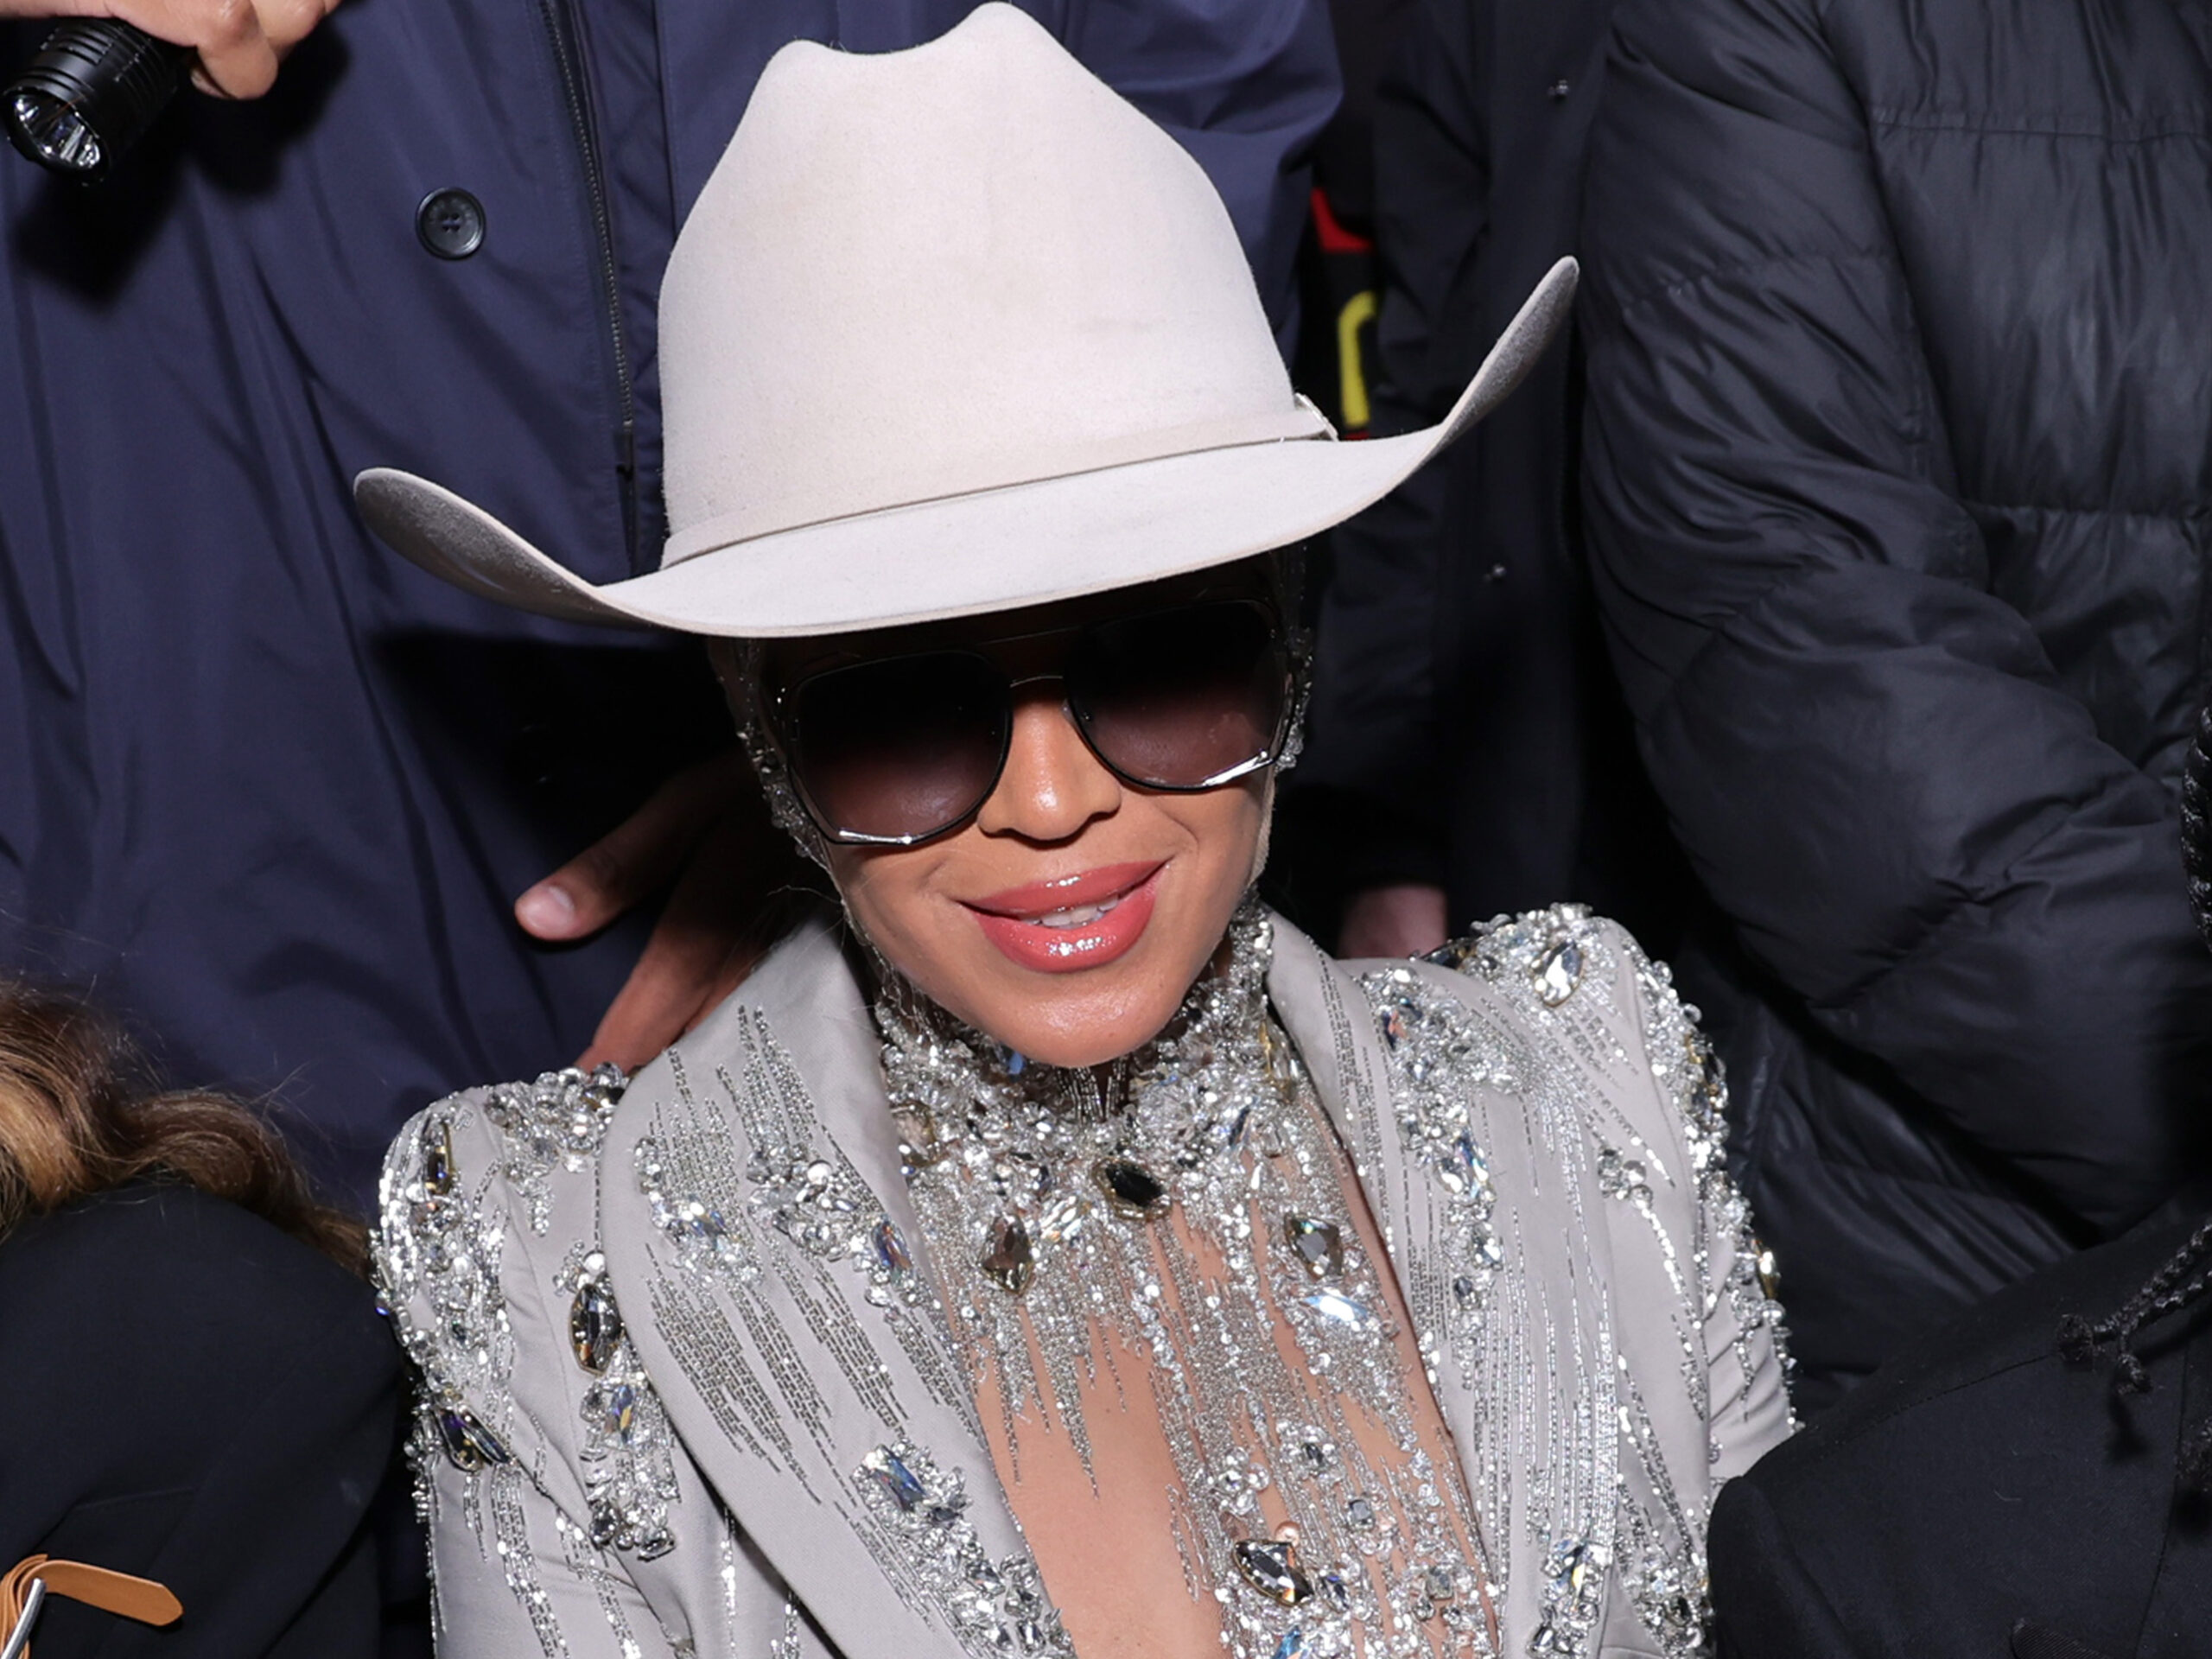 Beyoncé’s ‘Texas Hold ‘Em’ debuts at No. 1 on the country chart